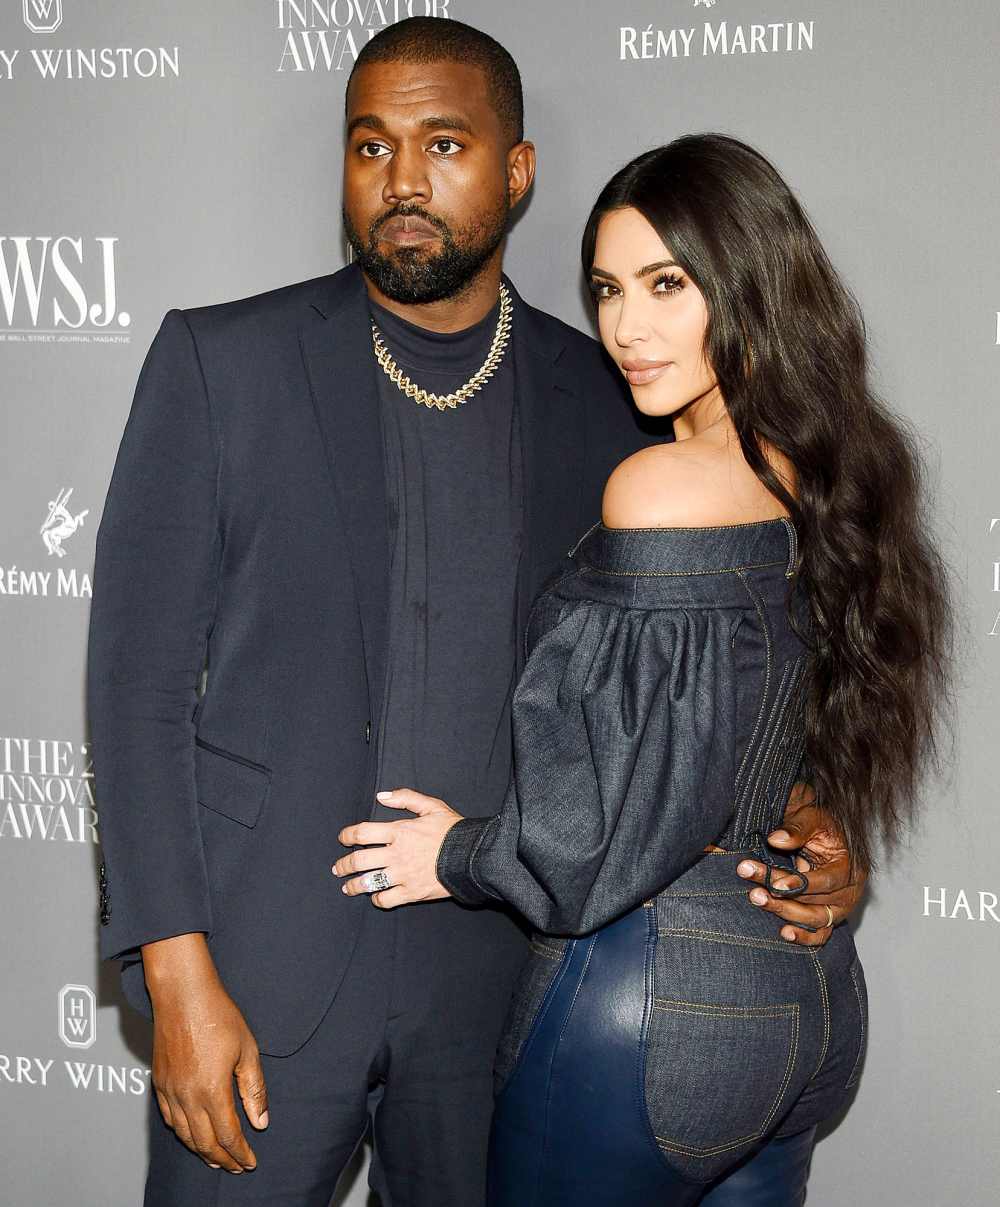 Kanye West and Kim Kardashian West attend the WSJ. Magazine Innovator Awards Kim Kardashian and Her Family Think Kanye West Crossed a Line by Sharing Private Family Matters